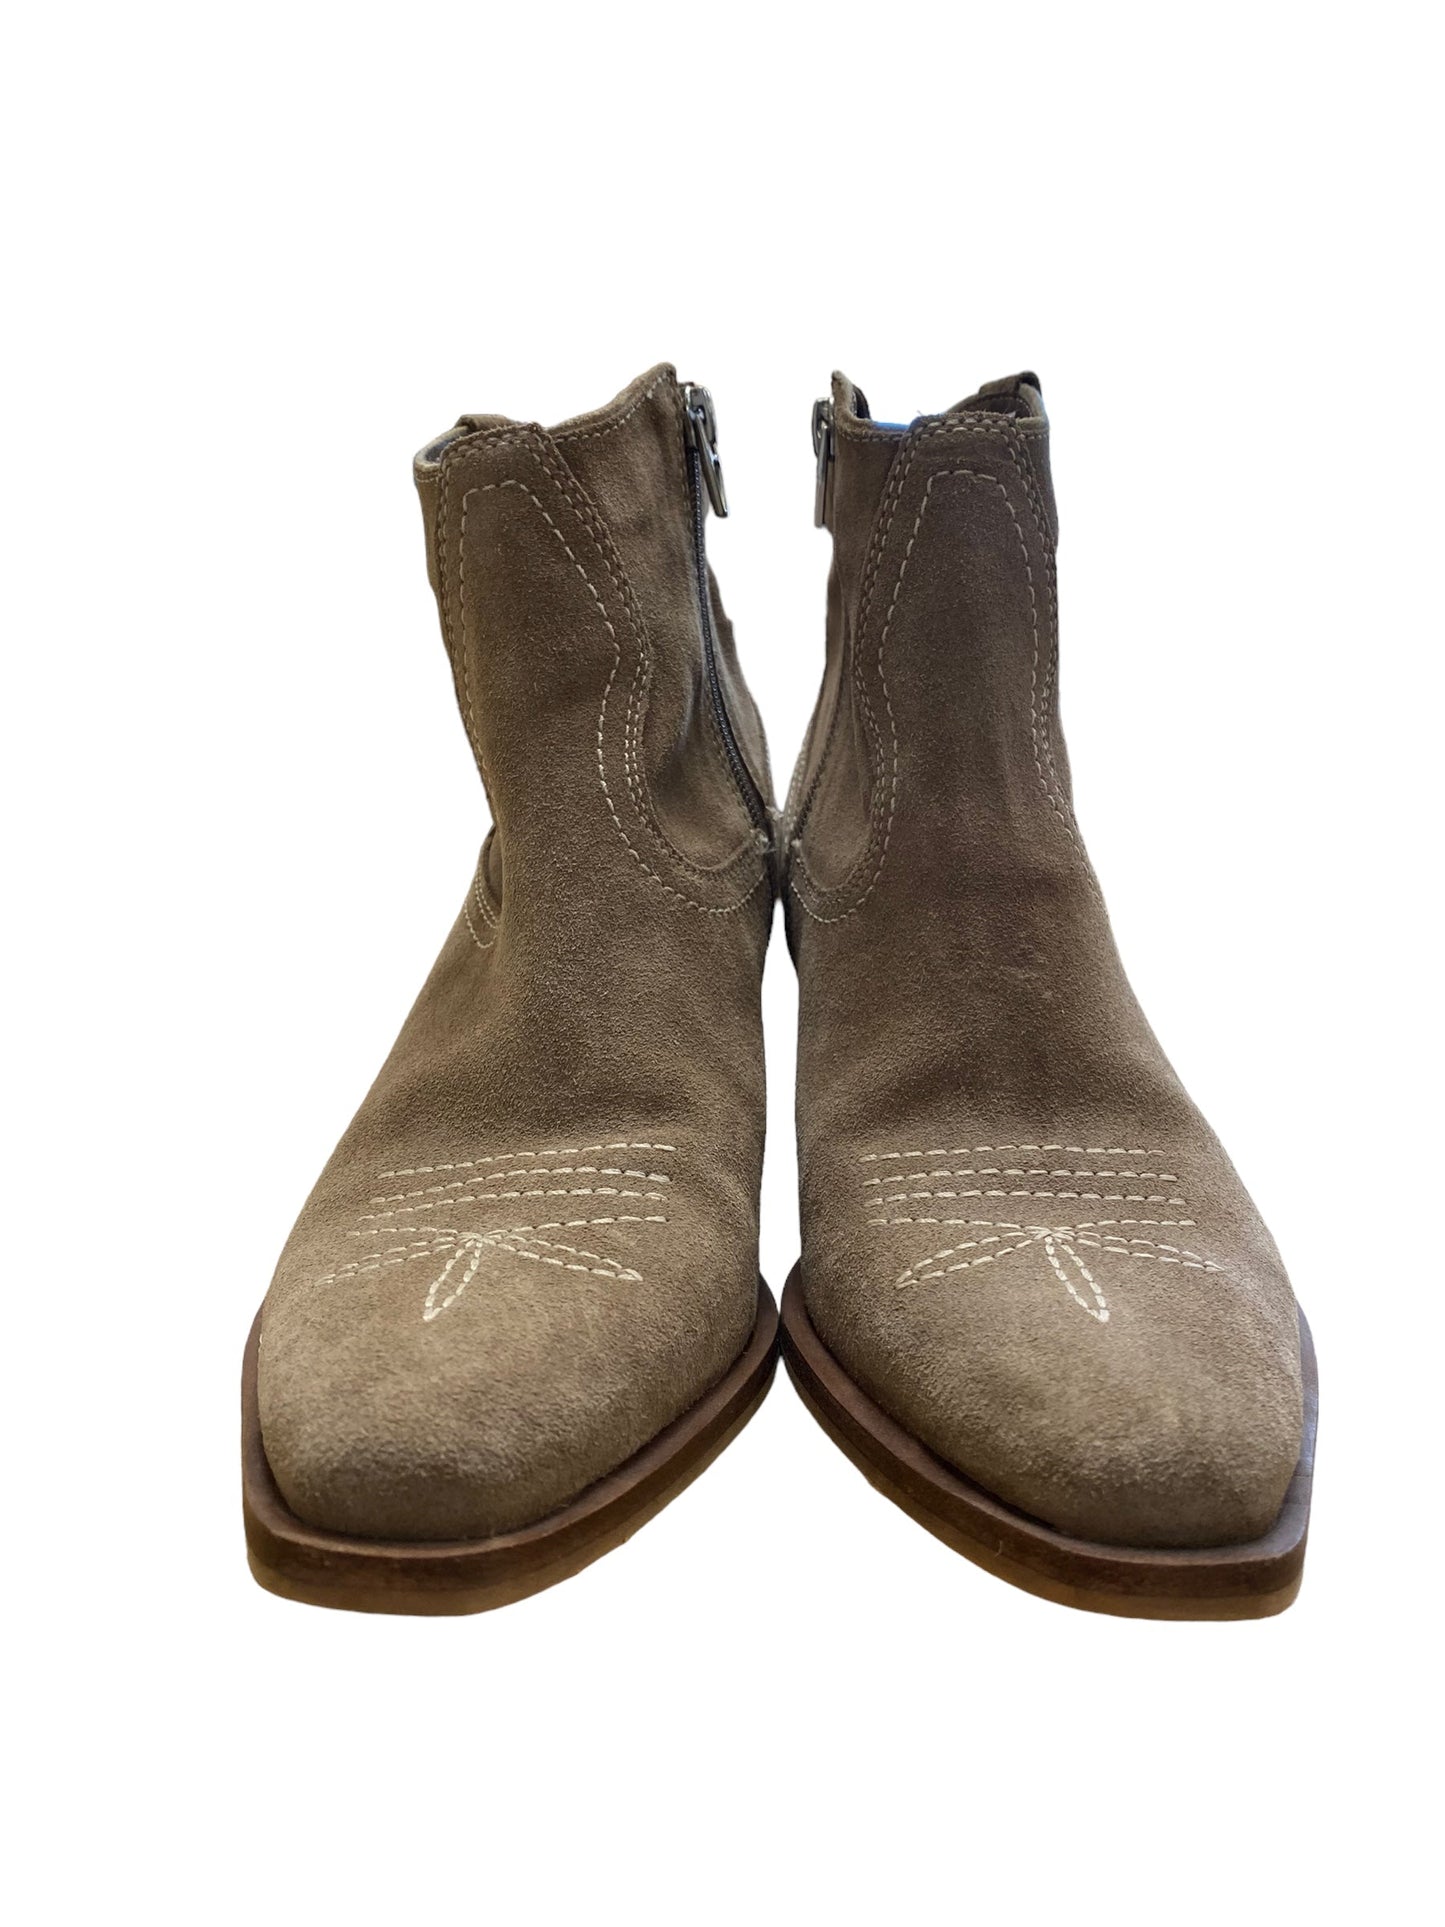 Boots Western By Dolce Vita  Size: 8